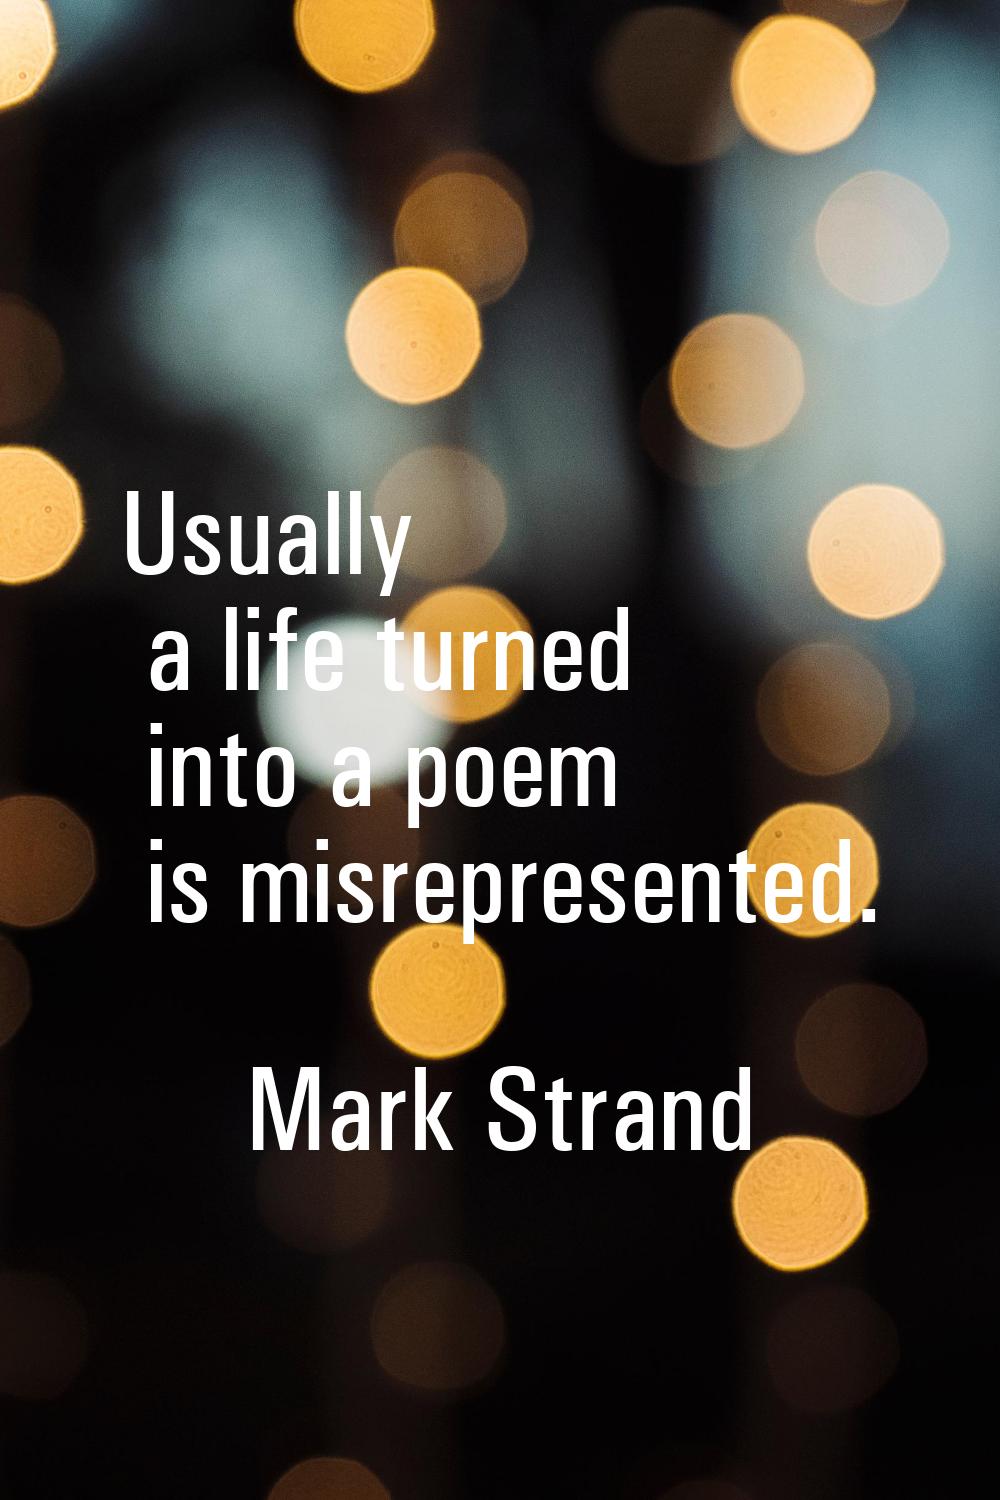 Usually a life turned into a poem is misrepresented.